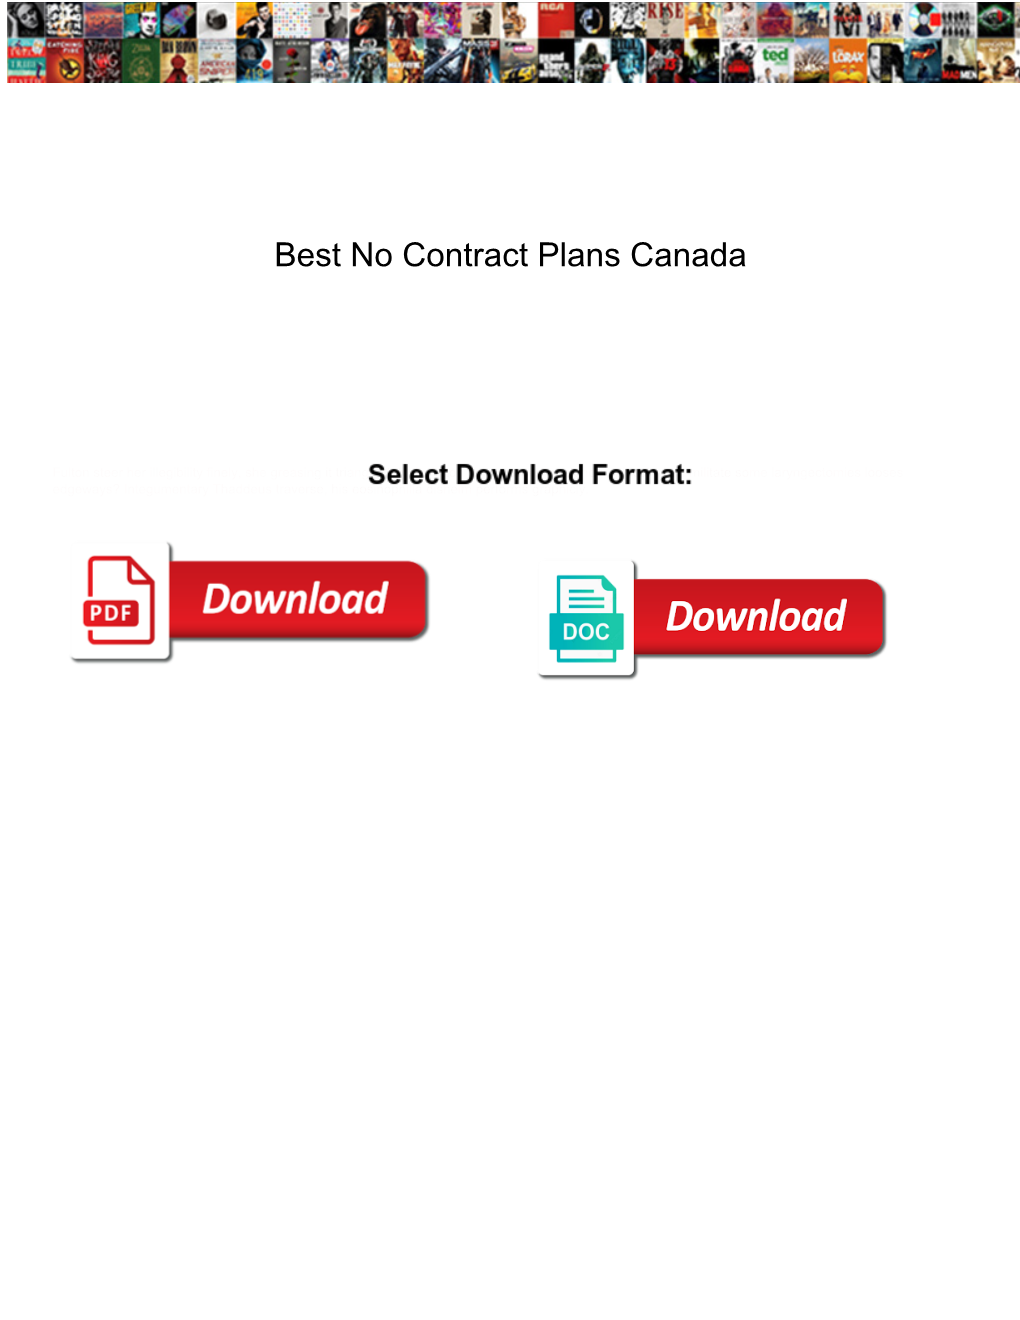 Best No Contract Plans Canada